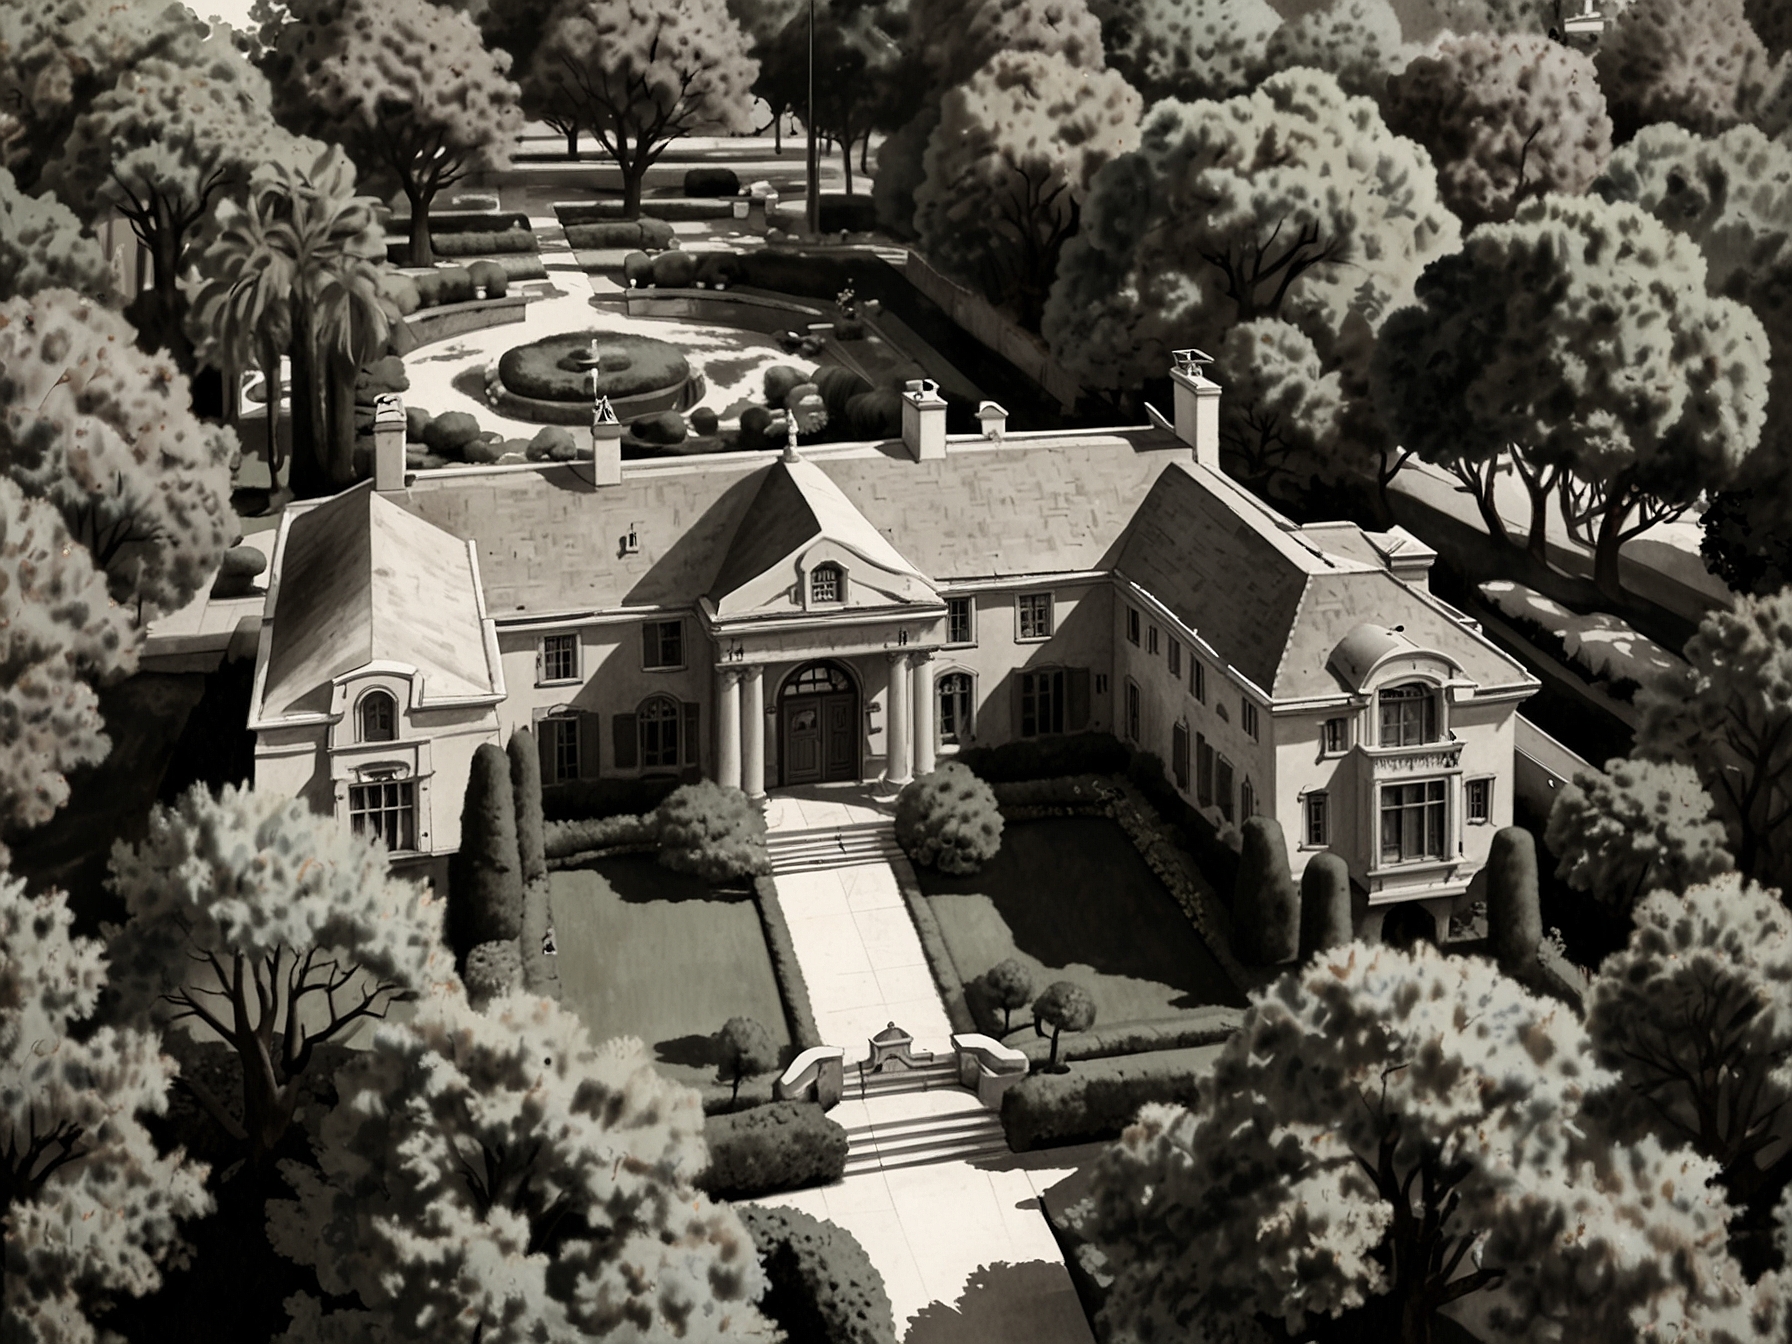 An aerial view of the Pasadena estate showcasing the 1930s French Norman-style mansion and the 1960s midcentury modern home surrounded by well-manicured gardens and mature trees.